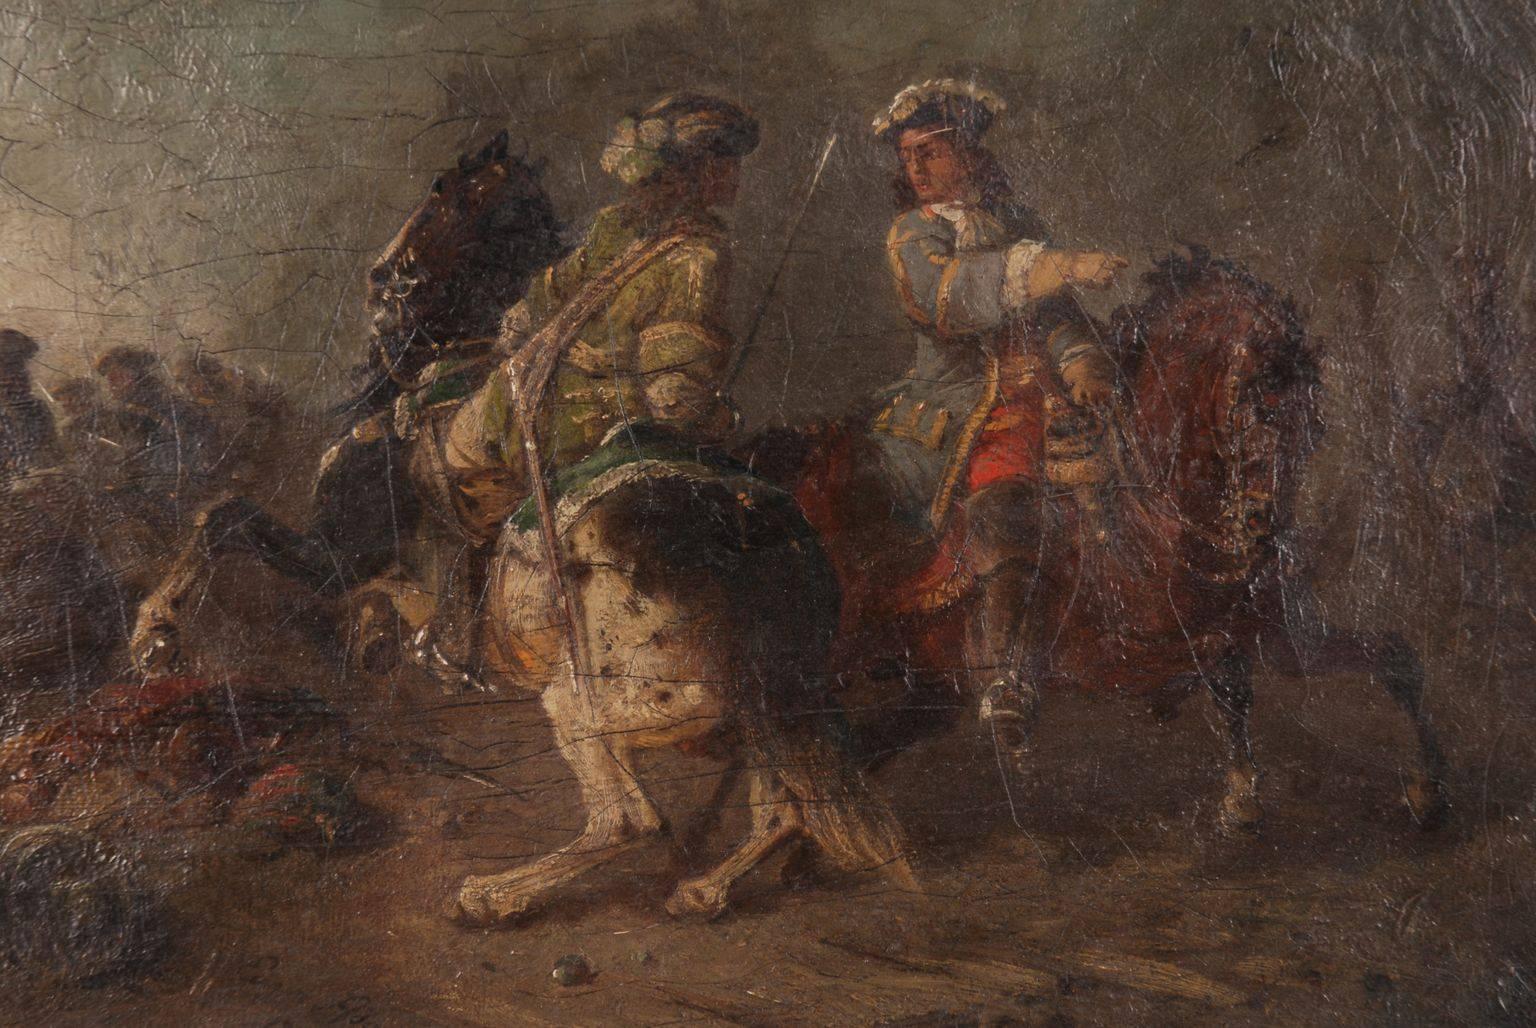 Oil painting battle scene of Adam Eugen (1817-1880).
Oil on canvas. Military scene from the time of the Spanish War of Succession, signed and dated Eugen Adam, 1878.

Measures in cm:
26 x 37 cm without frame.

(S-92).